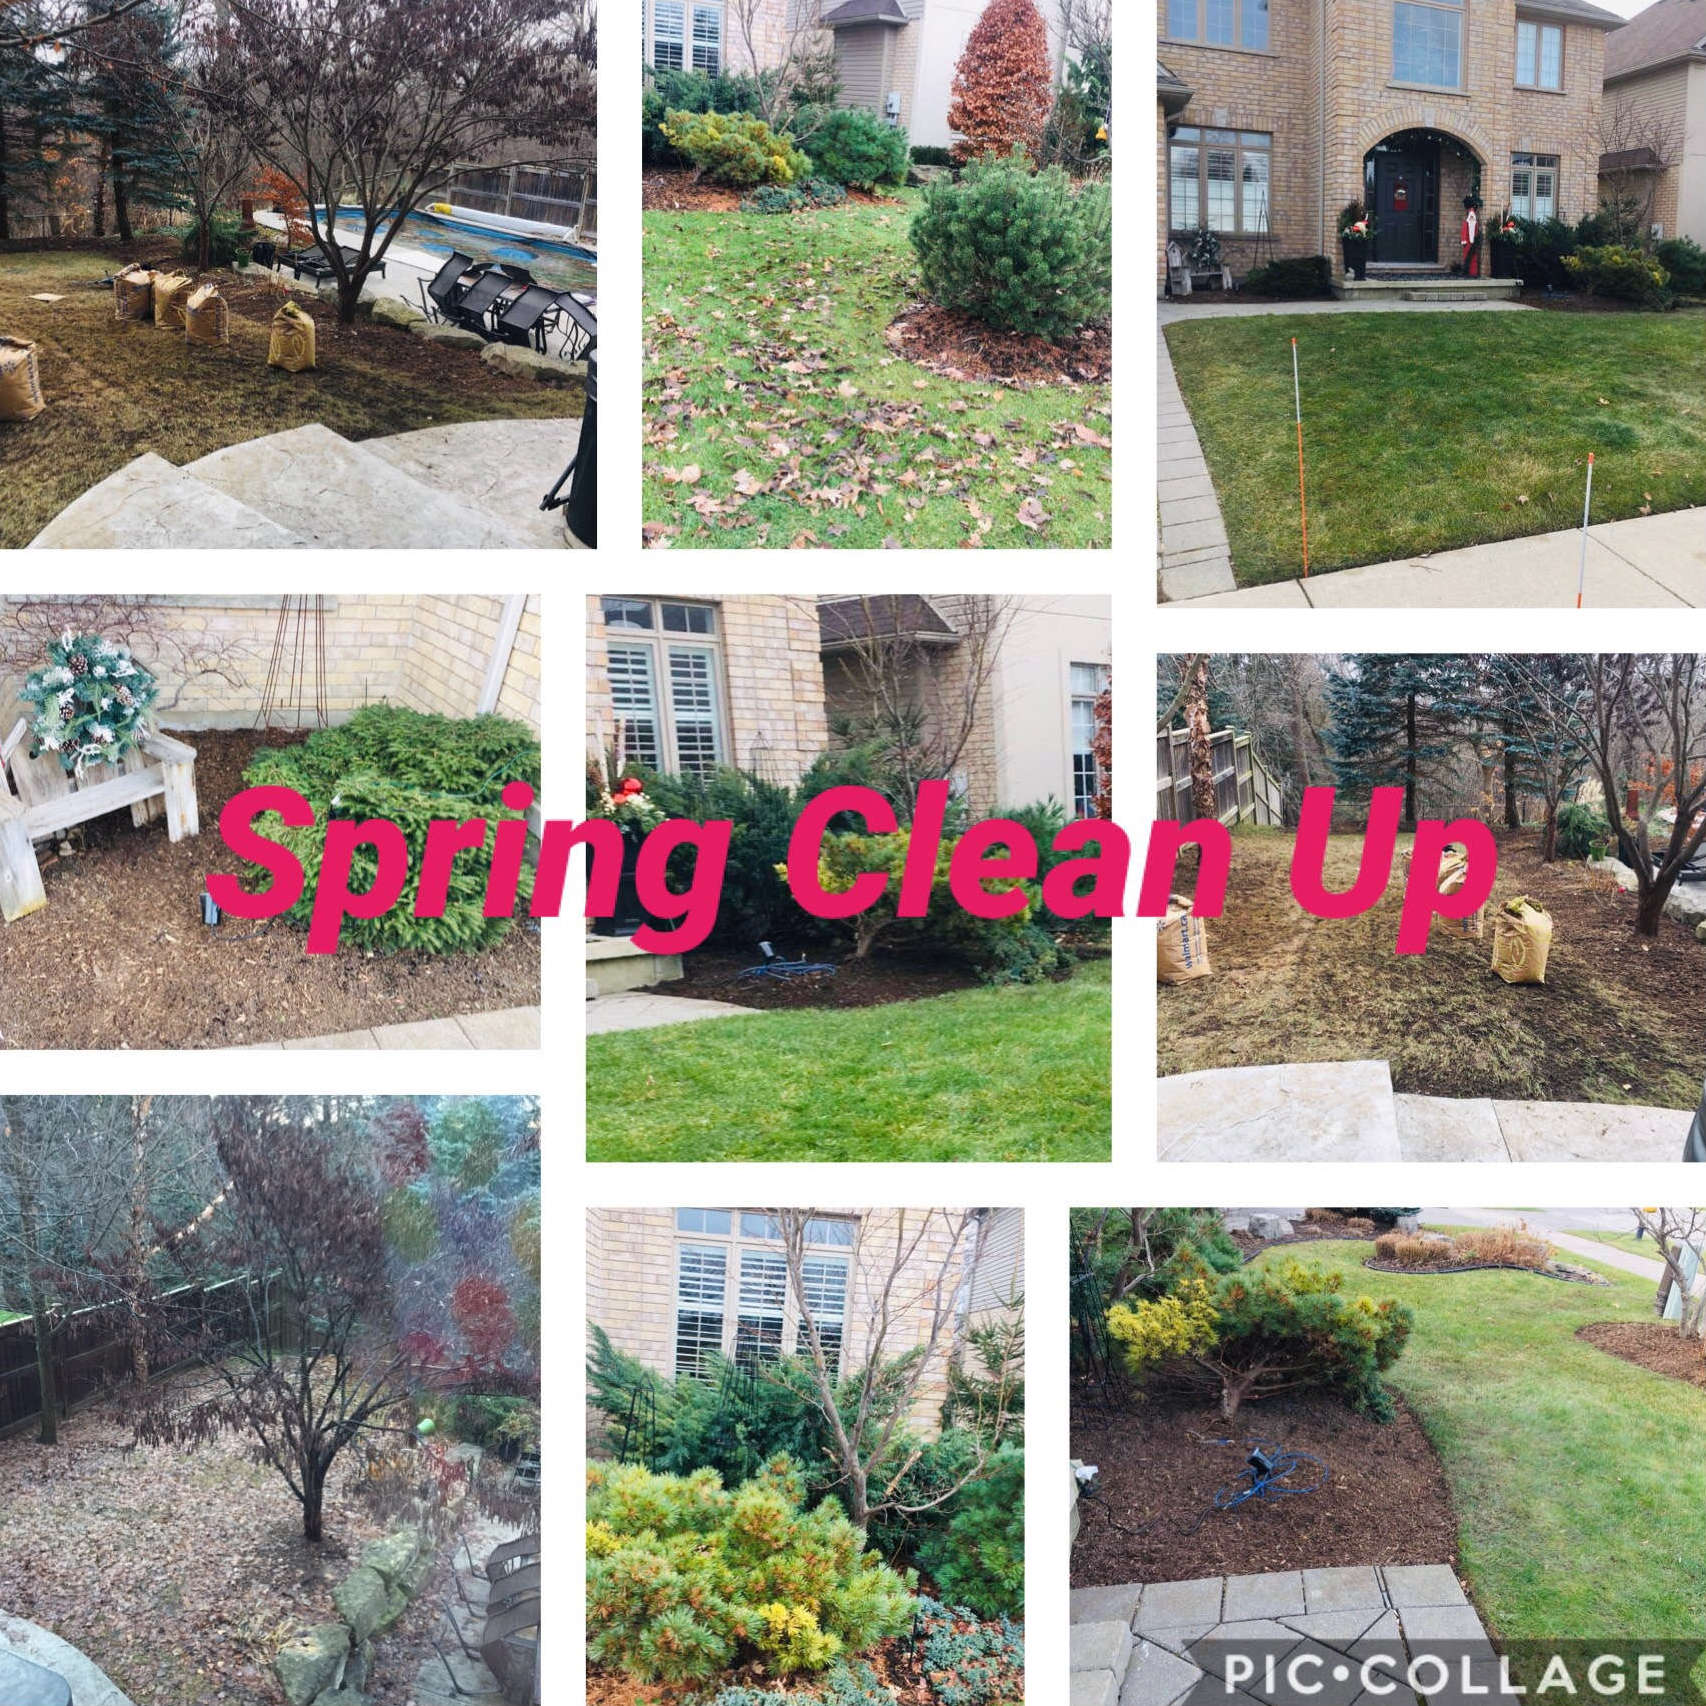 Spring and fall clean up projects in London Ontario.